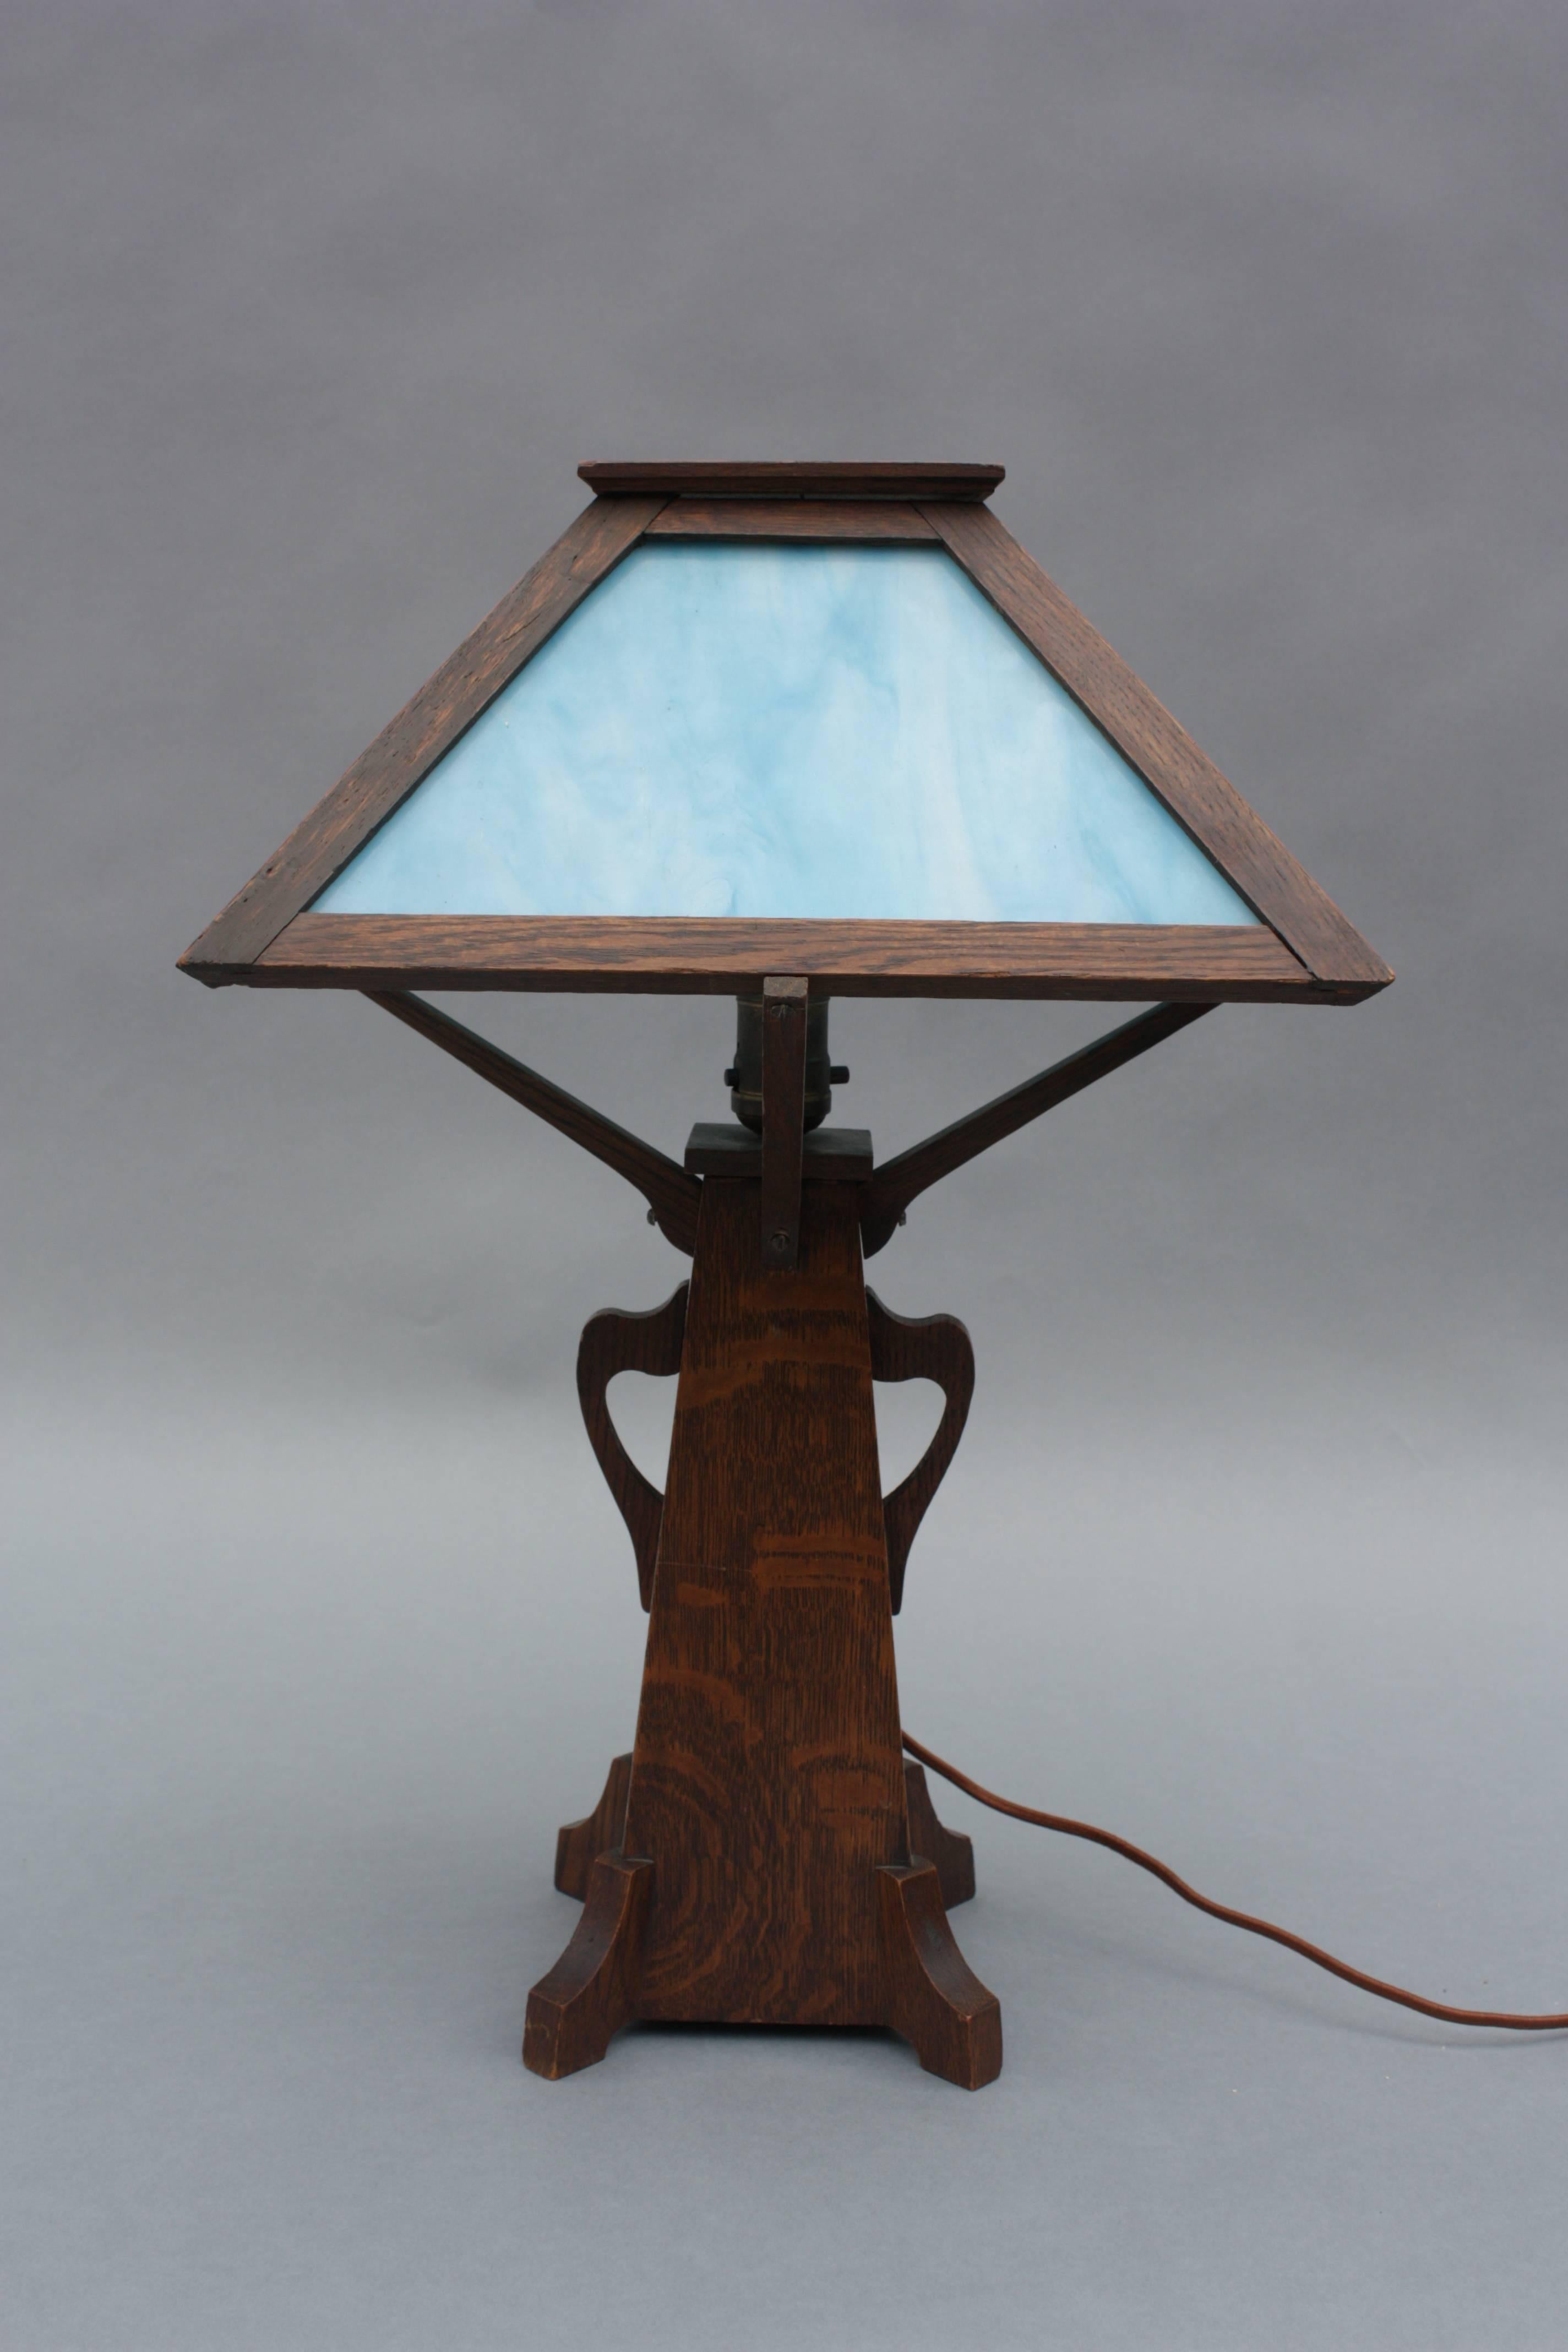 Graceful Arts & Crafts / Mission table lamp with blue slag glass.